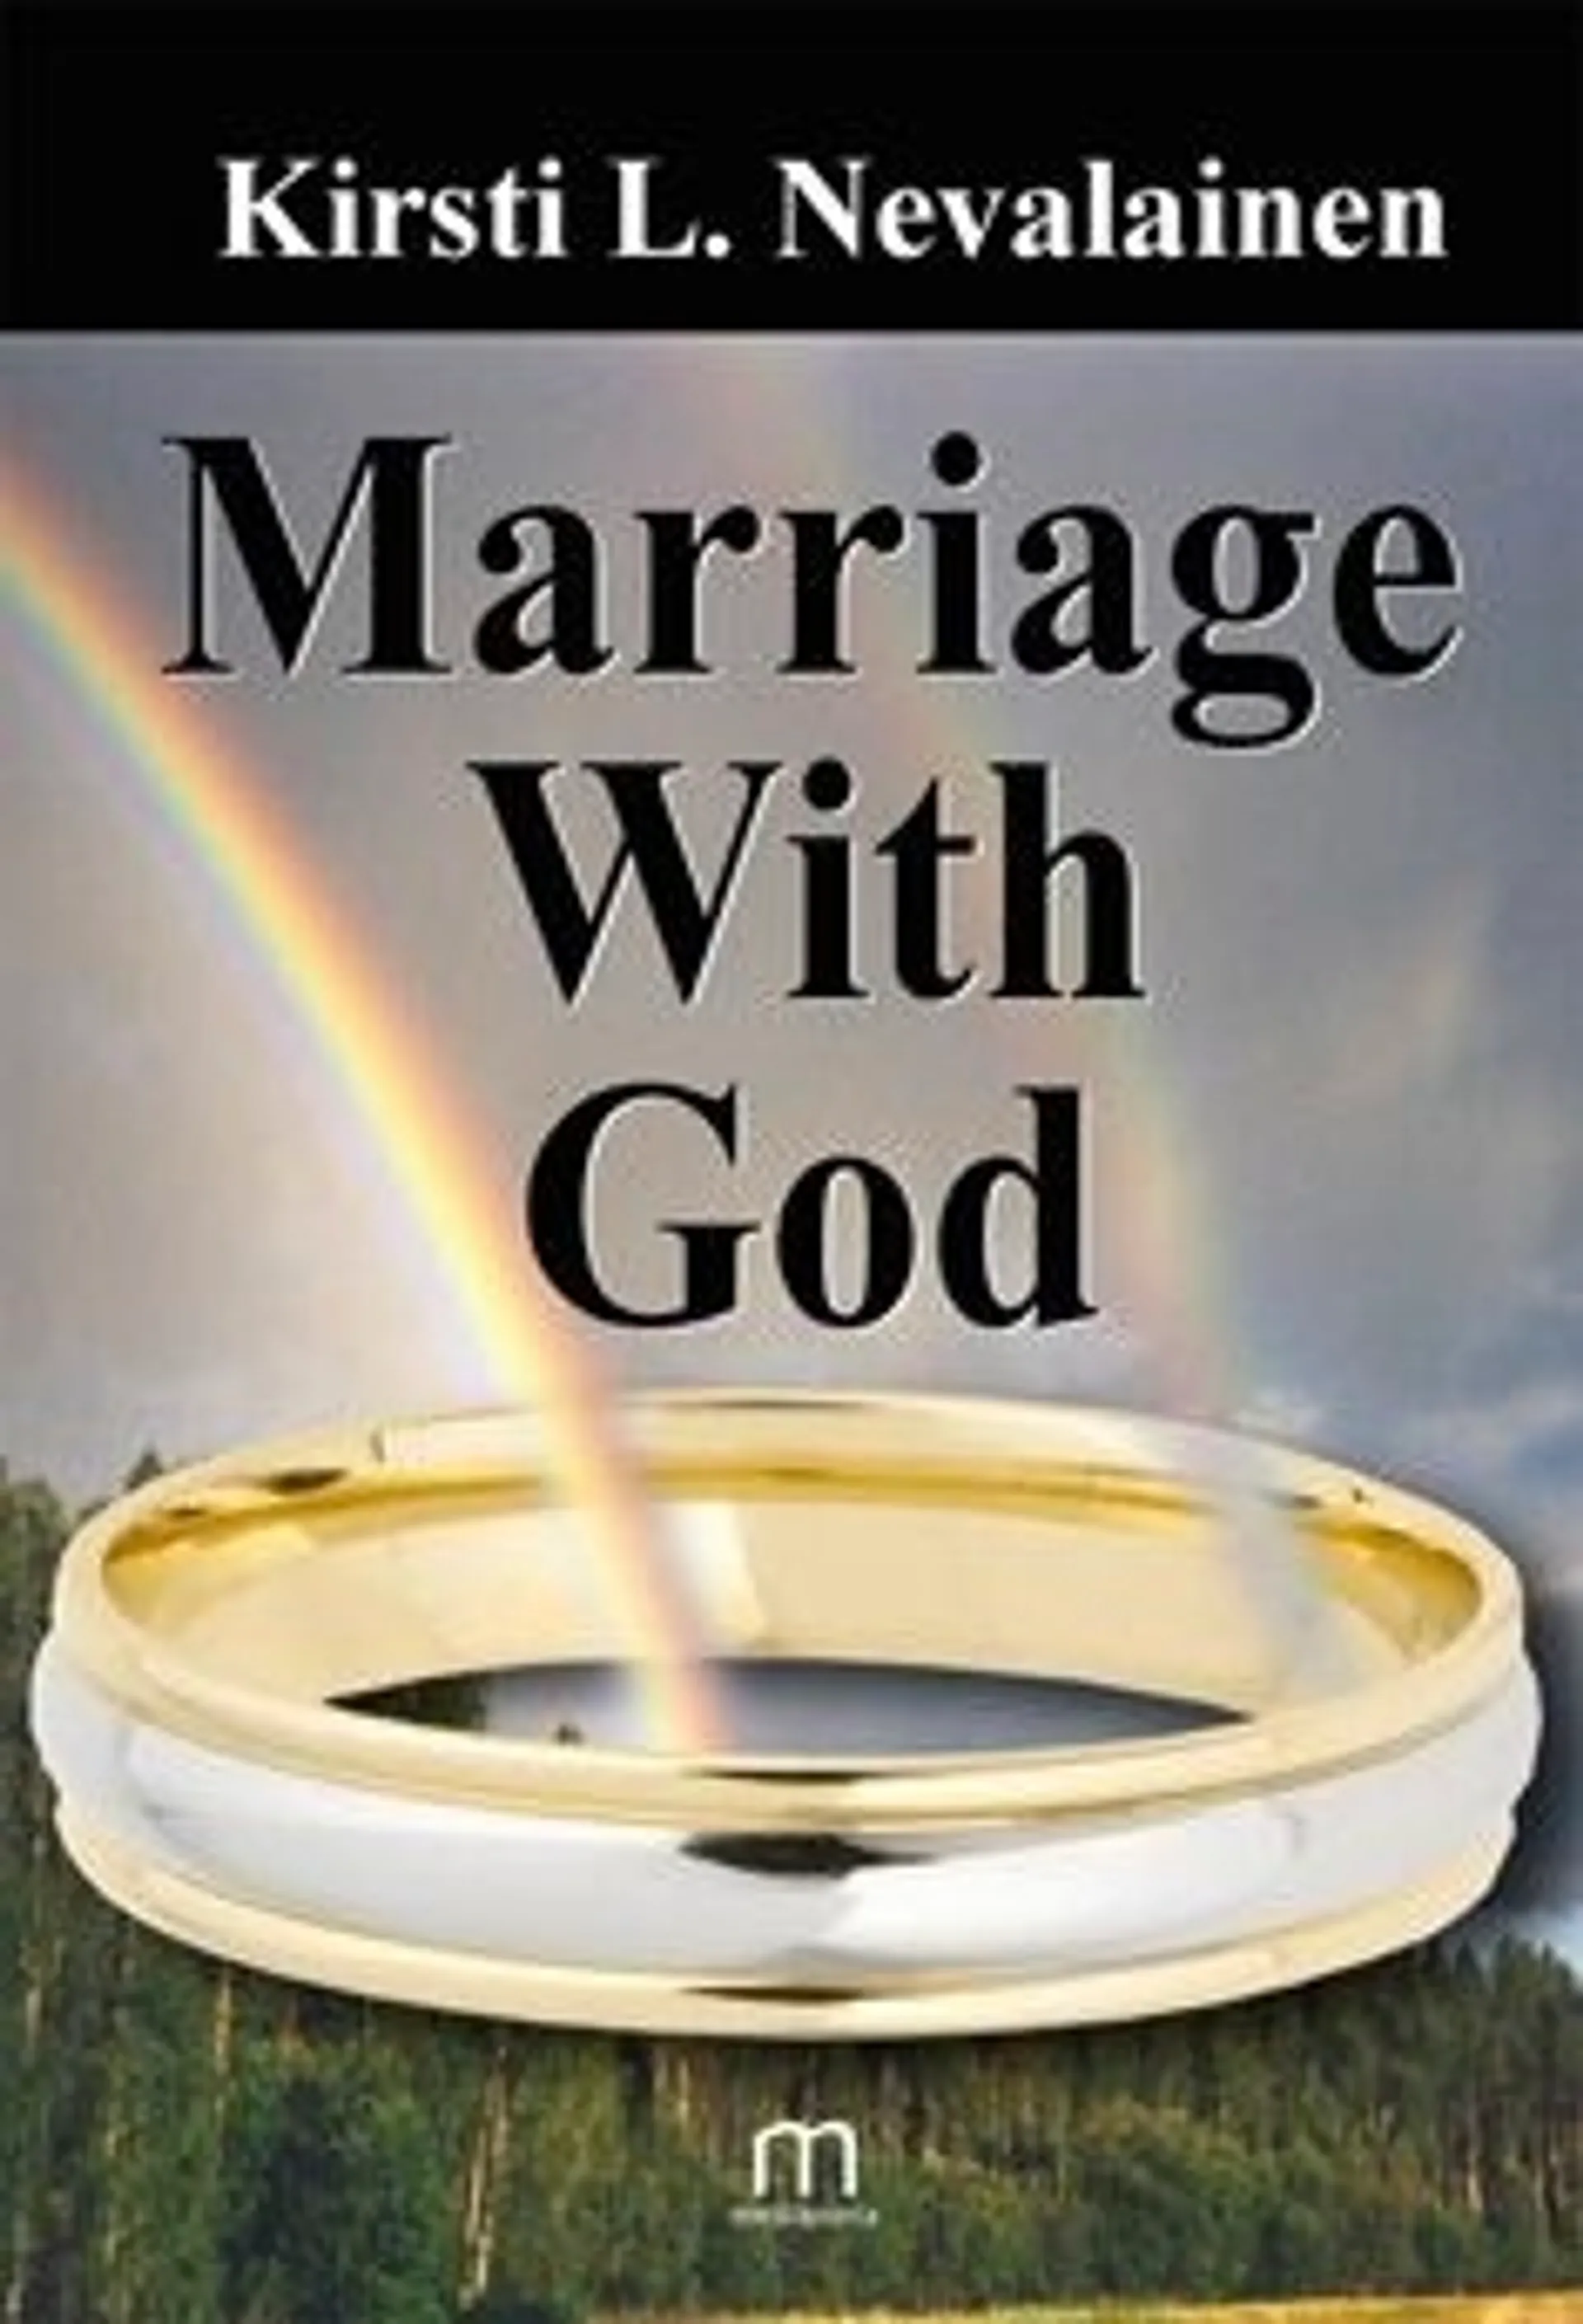 Nevalainen, Marriage with god